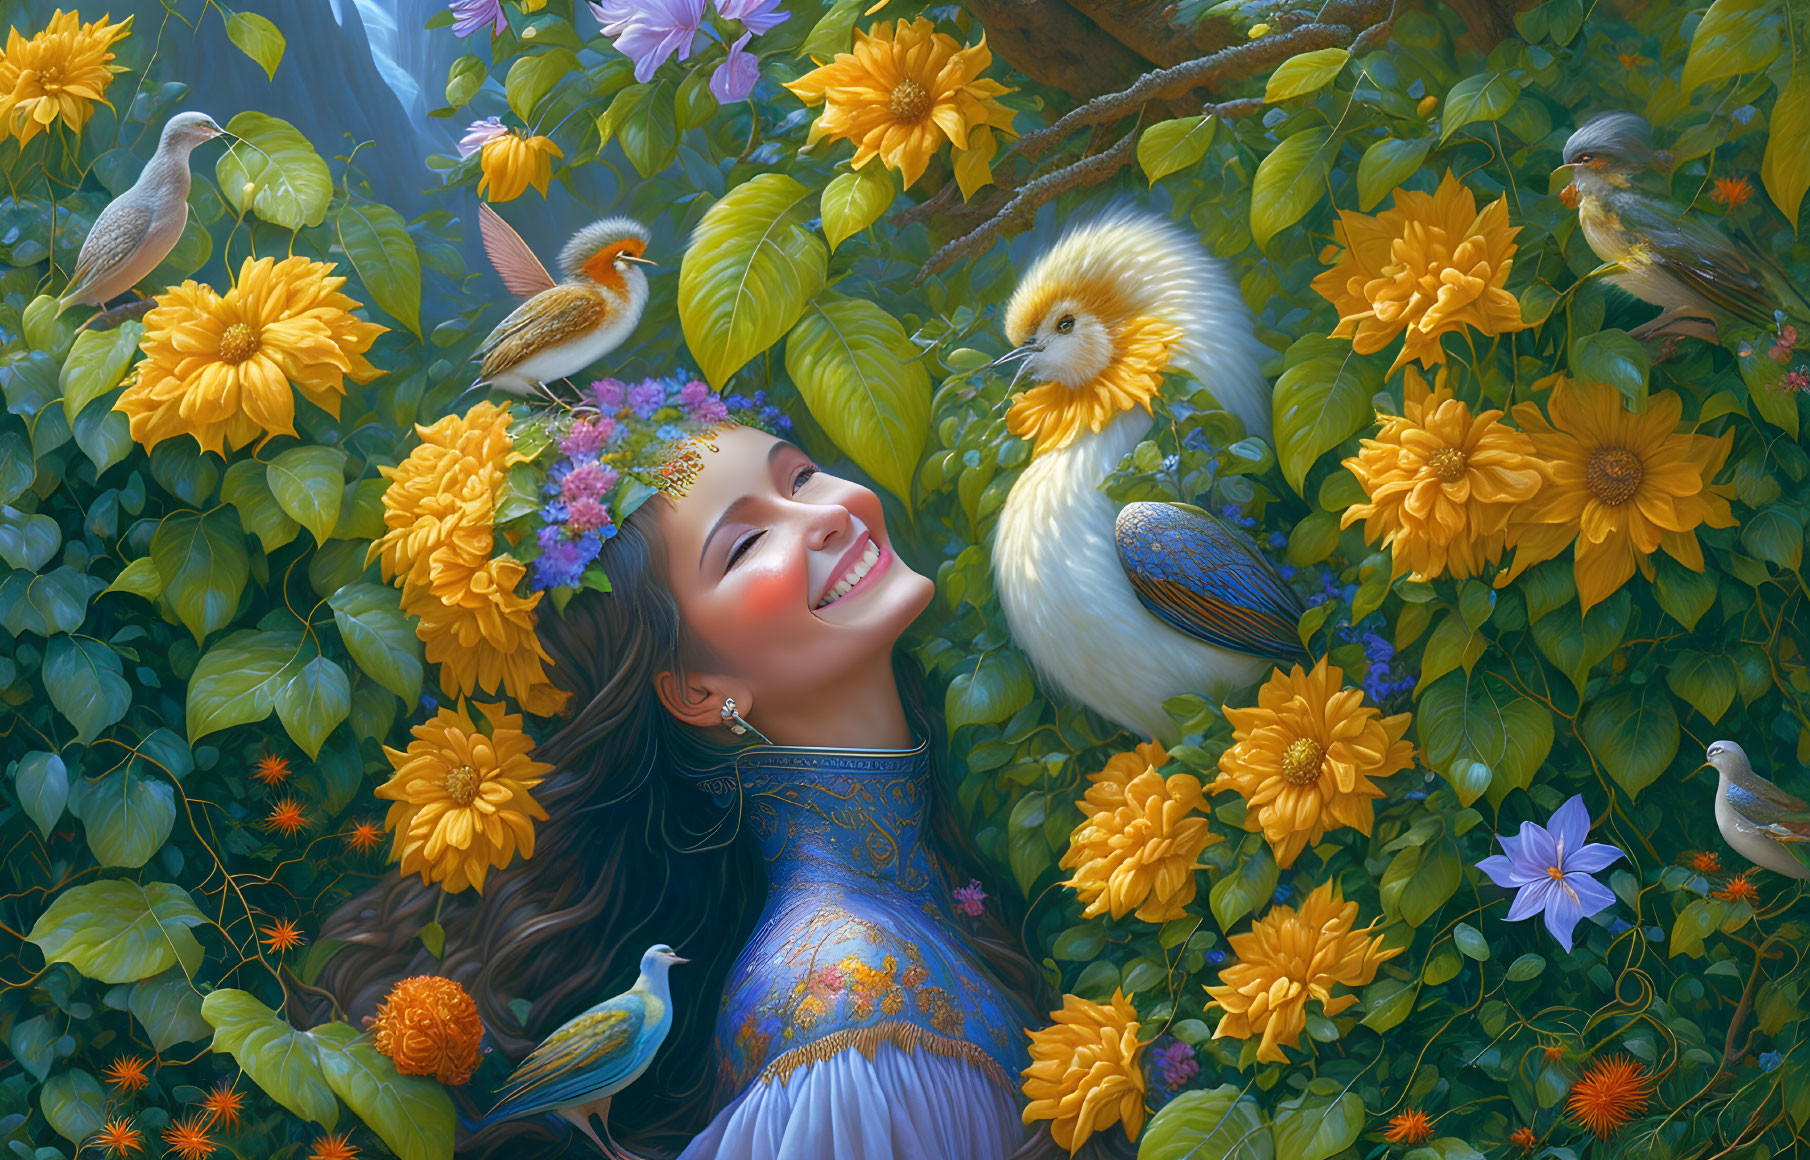 Joyful woman with flower crown amidst sunflowers and whimsical birds